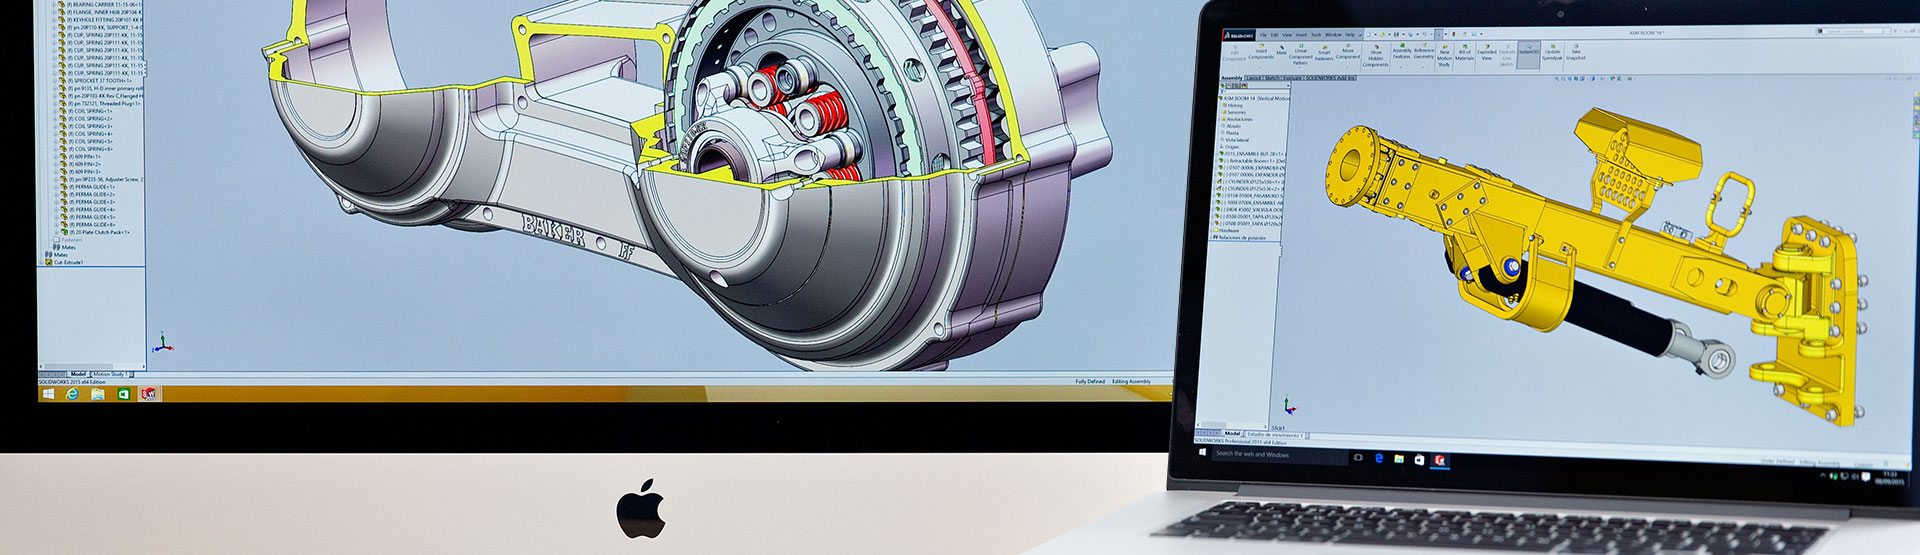 solidworks file viewer for mac